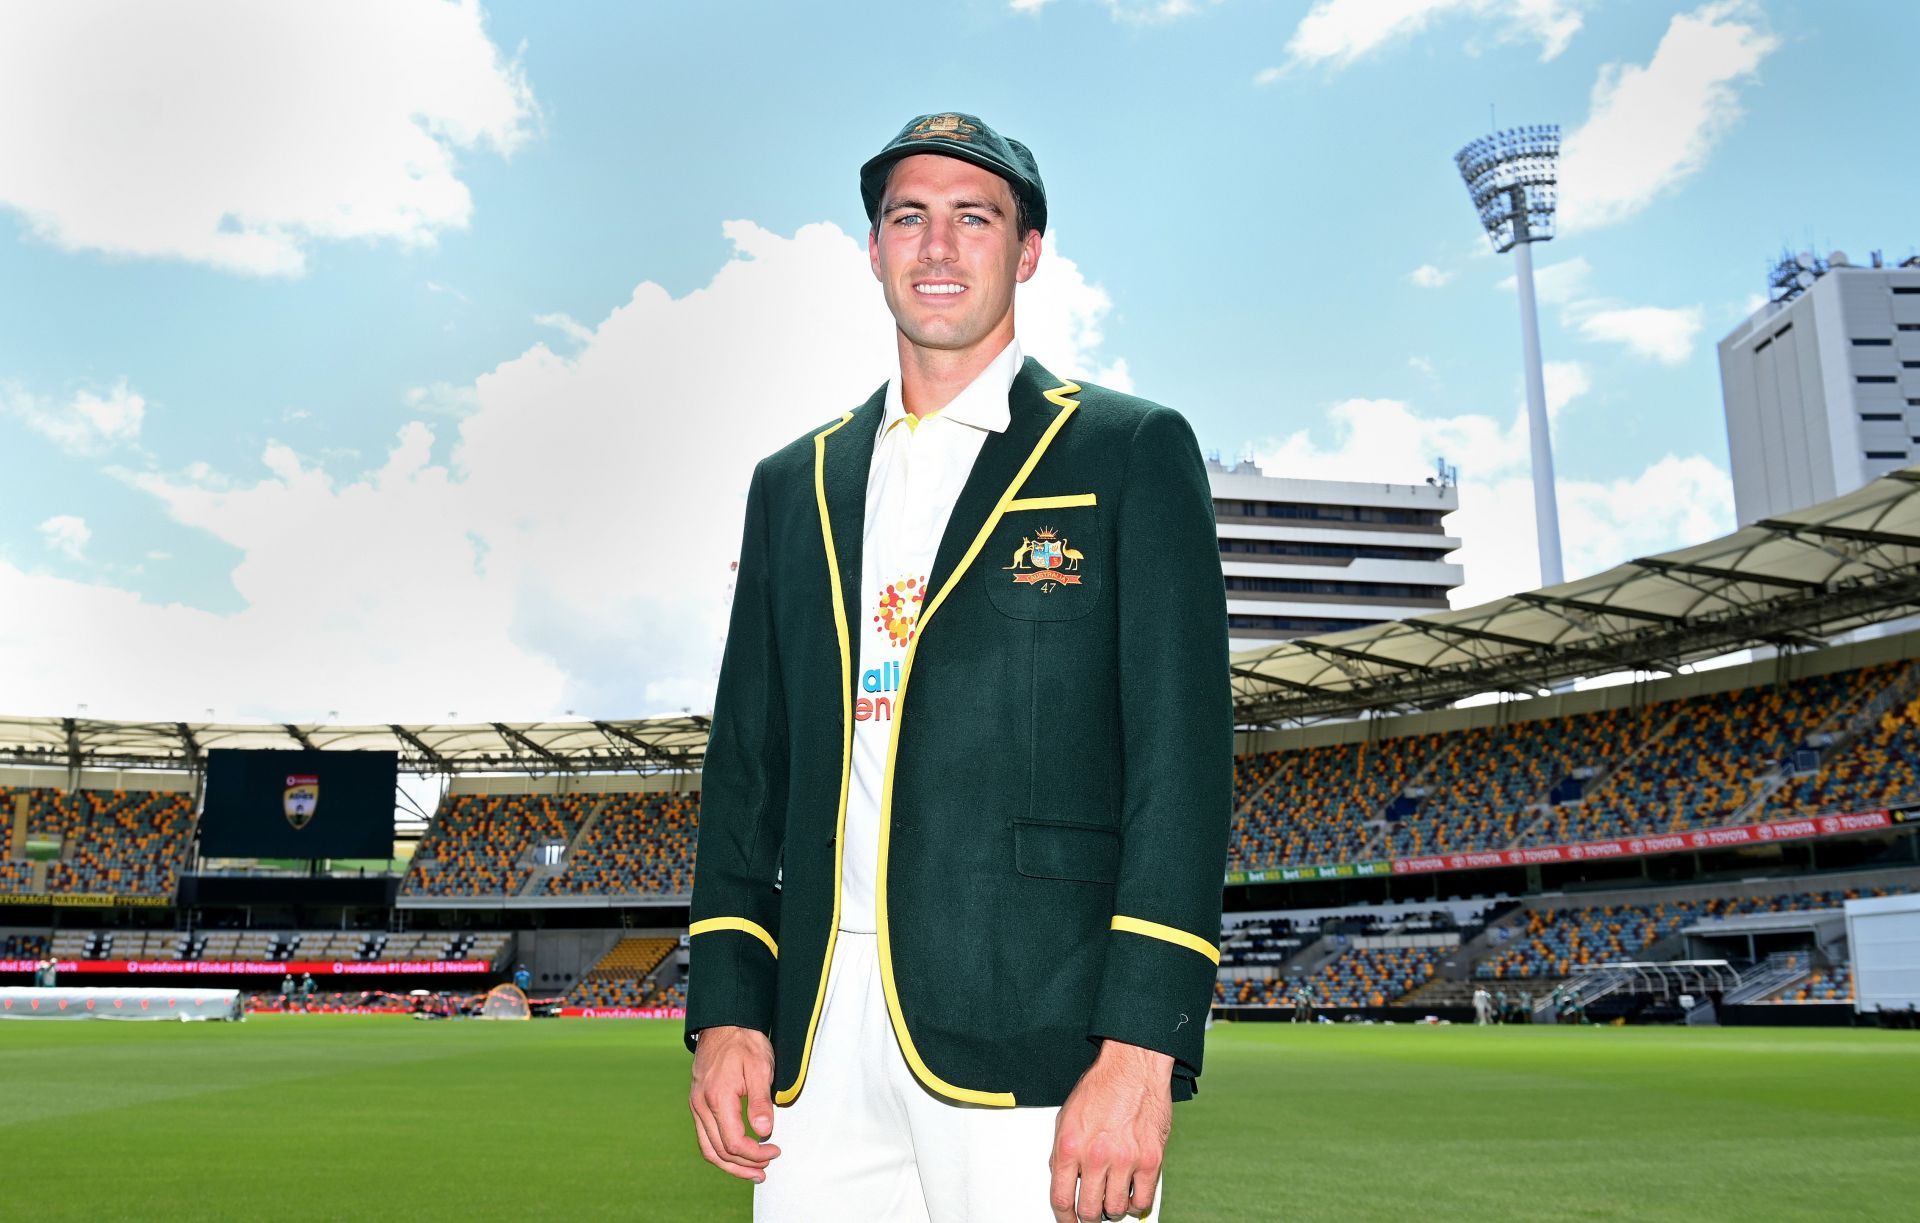 Pat Cummins was named as the 47th captain of the Australian Test team ahead of the Ashes